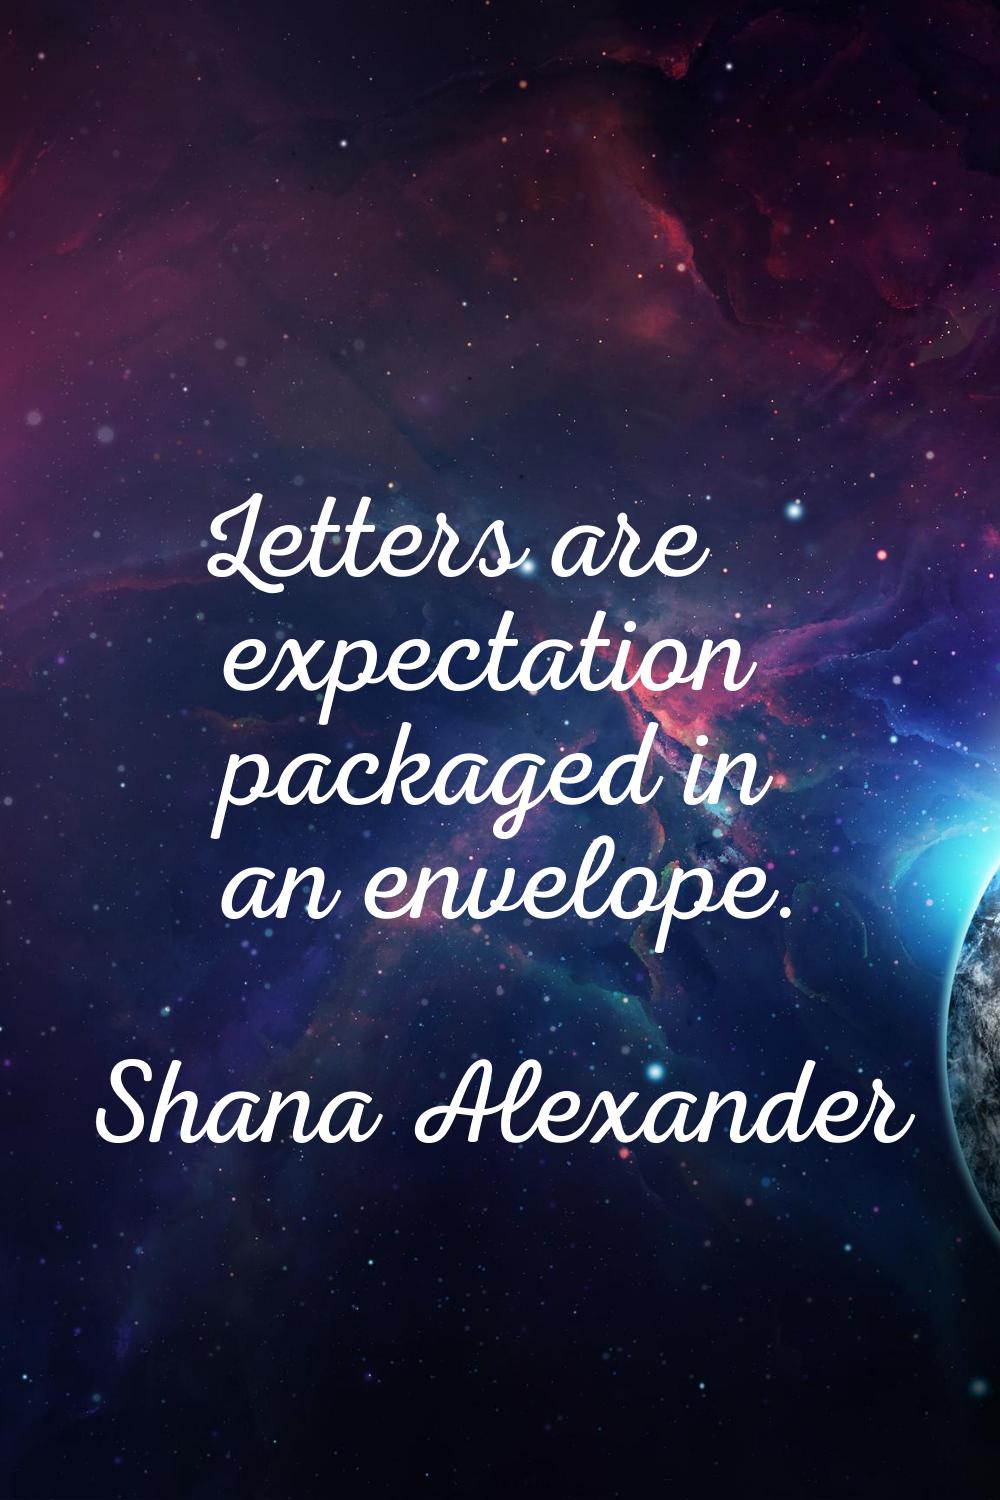 Letters are expectation packaged in an envelope.